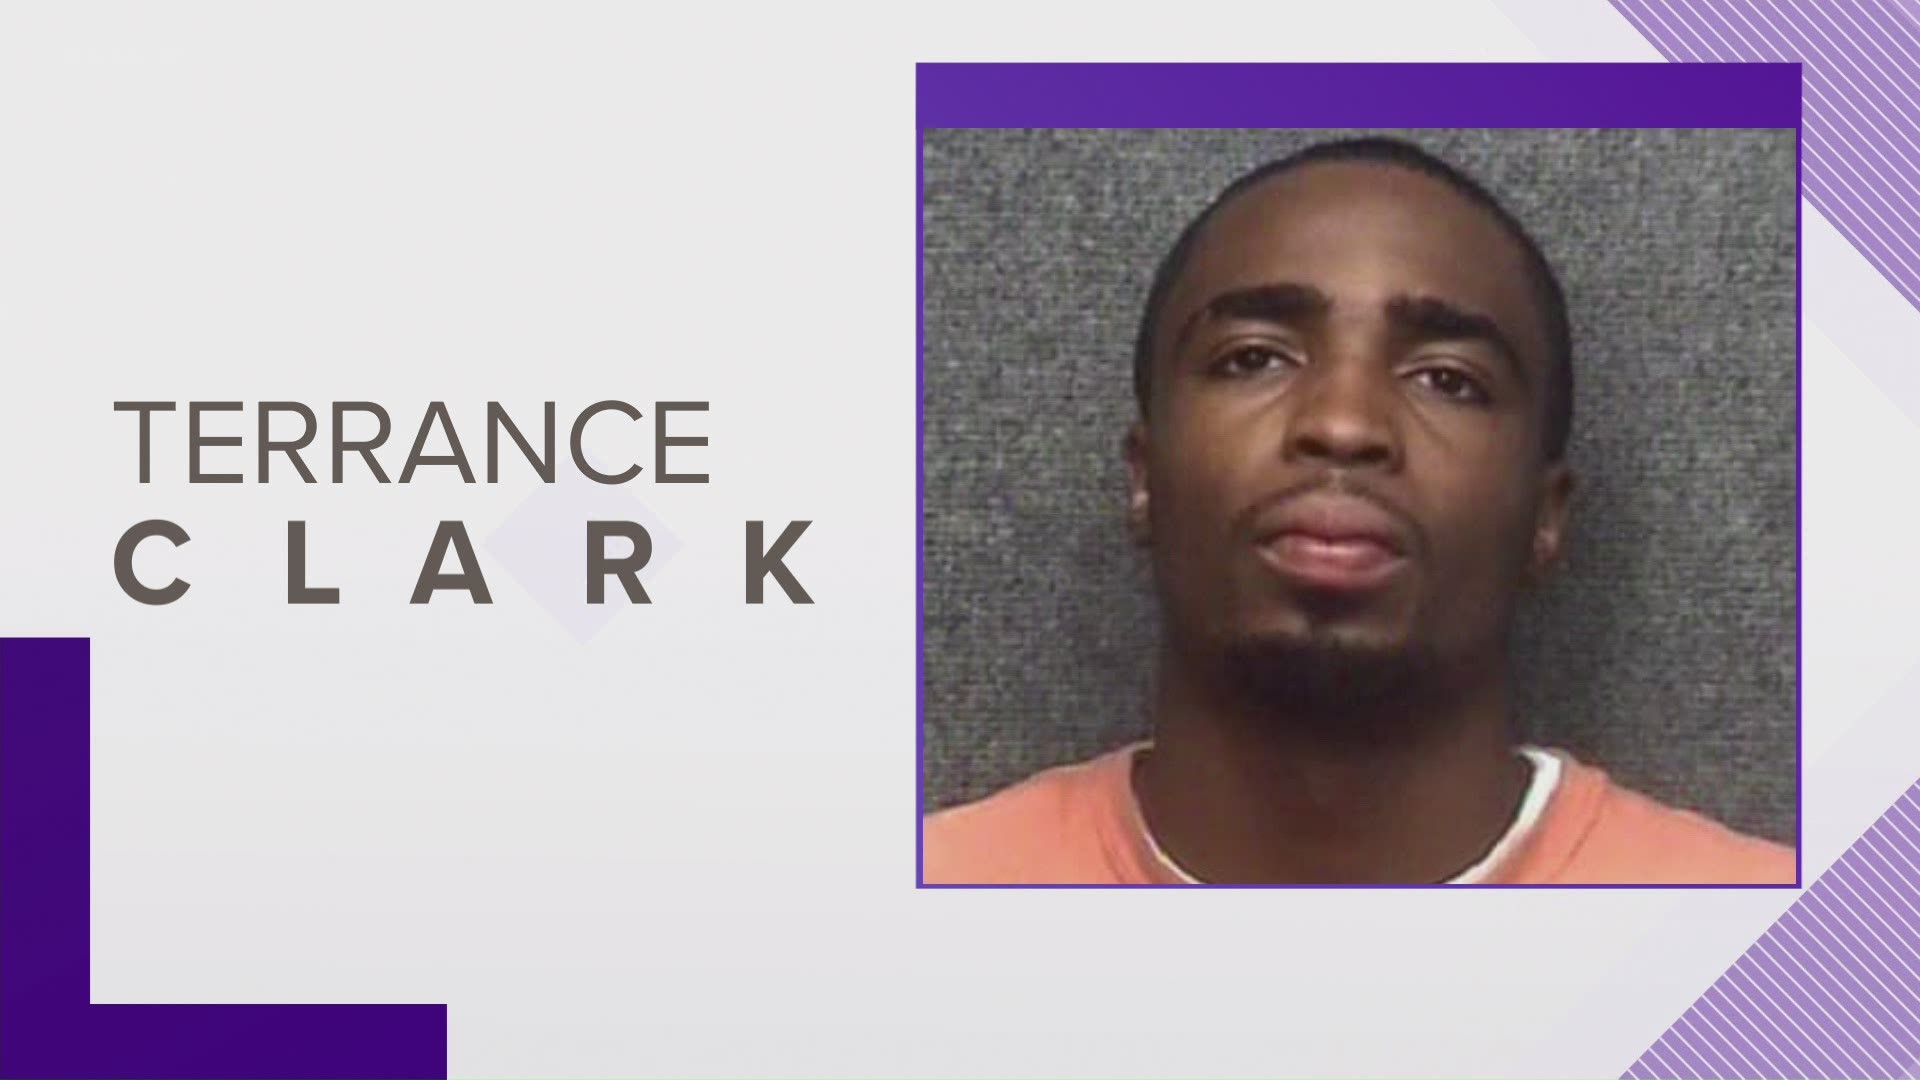 21-year-old Terrance Lamar Clark from Lugoff was last seen 3 days ago at Myrtle Beach, according to officials.